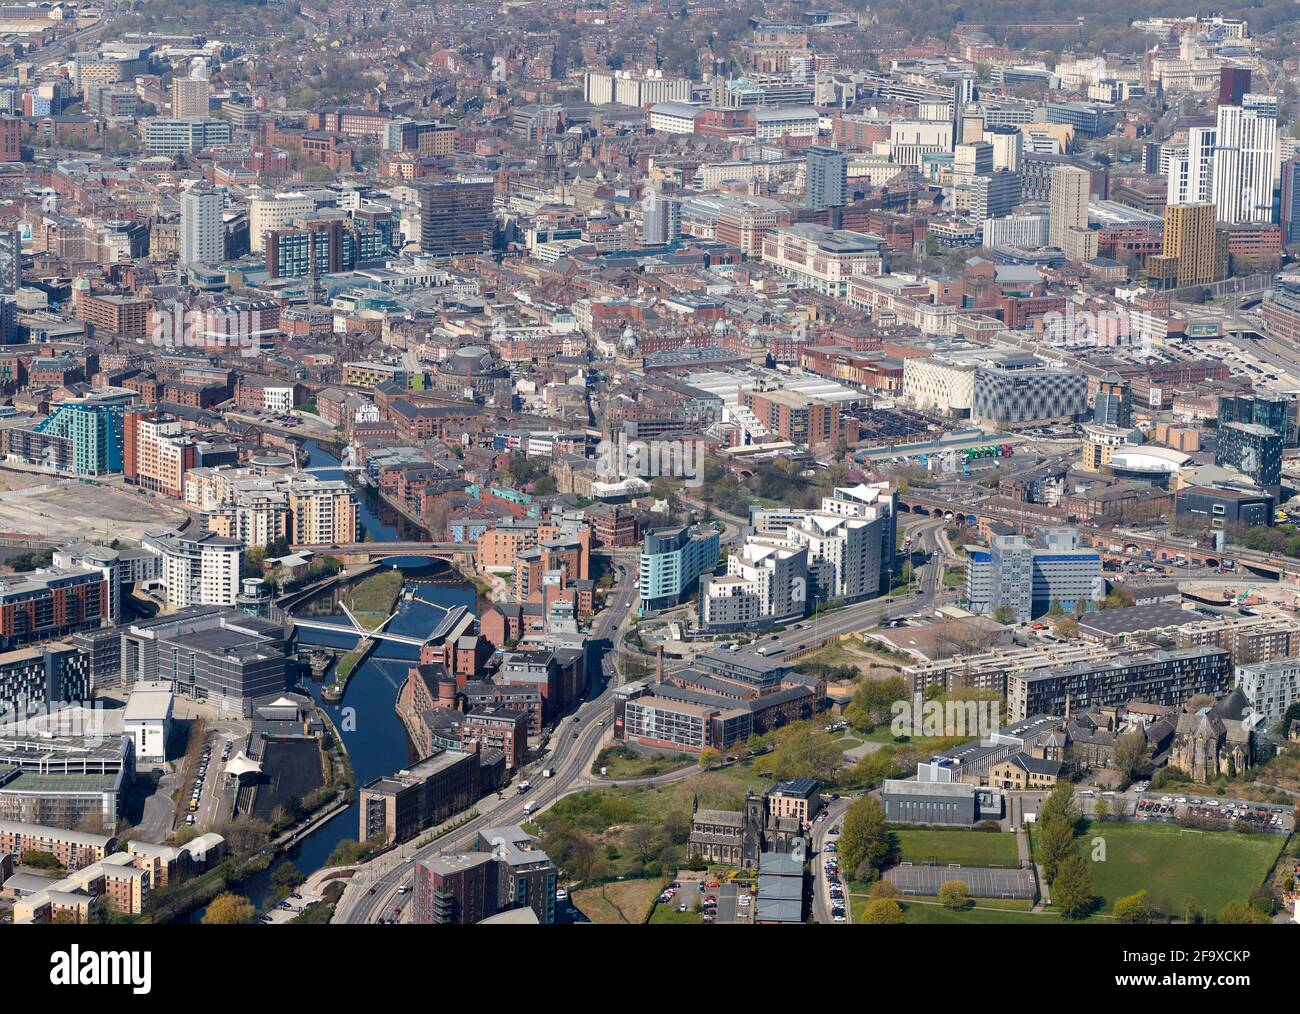 An aerial view of Leeds City Centre, West Yorkshire, Northern England, UK, from the east looking up the River Aire showing new riverside development Stock Photo